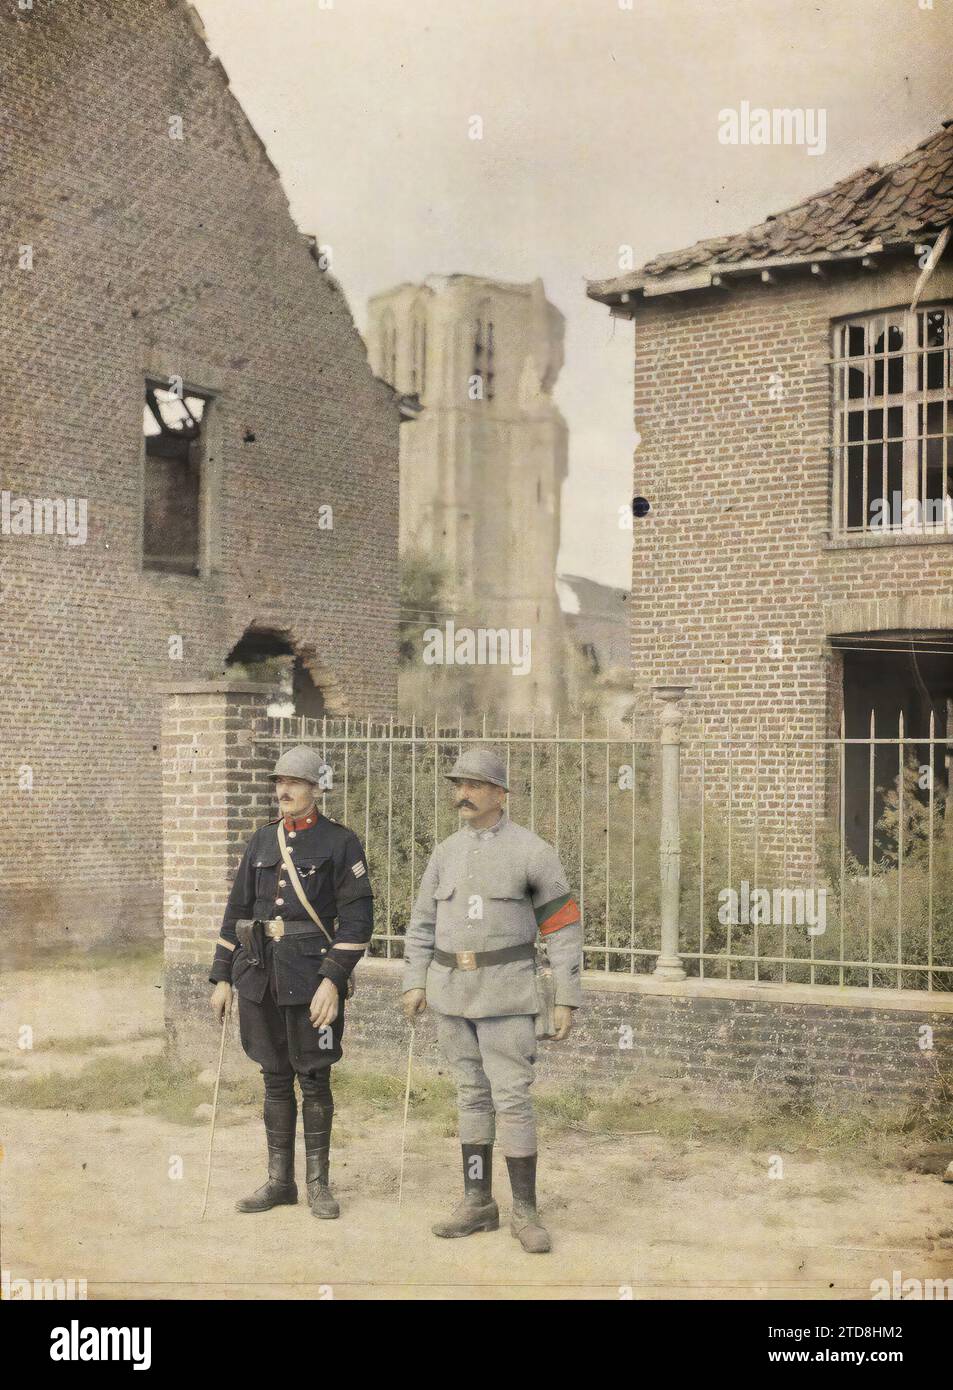 Woesten, Belgium, First World War, Clothing, Human Beings, Rear Front, Military Uniform, Bell Tower, Portrait, Police Officer, Gendarme, Man, Belgium, Woesten, Belgian Gendarme and aide French Gendarme, Woesten, France [in connection with], 25/08/1917 - 25/08/1917, Castelnau, Paul, 1917 - Nord de la France, Belgique - Paul Castelnau (Photographic section of the army) - (1-5 September), Autochrome, photo, Glass, Autochrome, photo, Positive Stock Photo